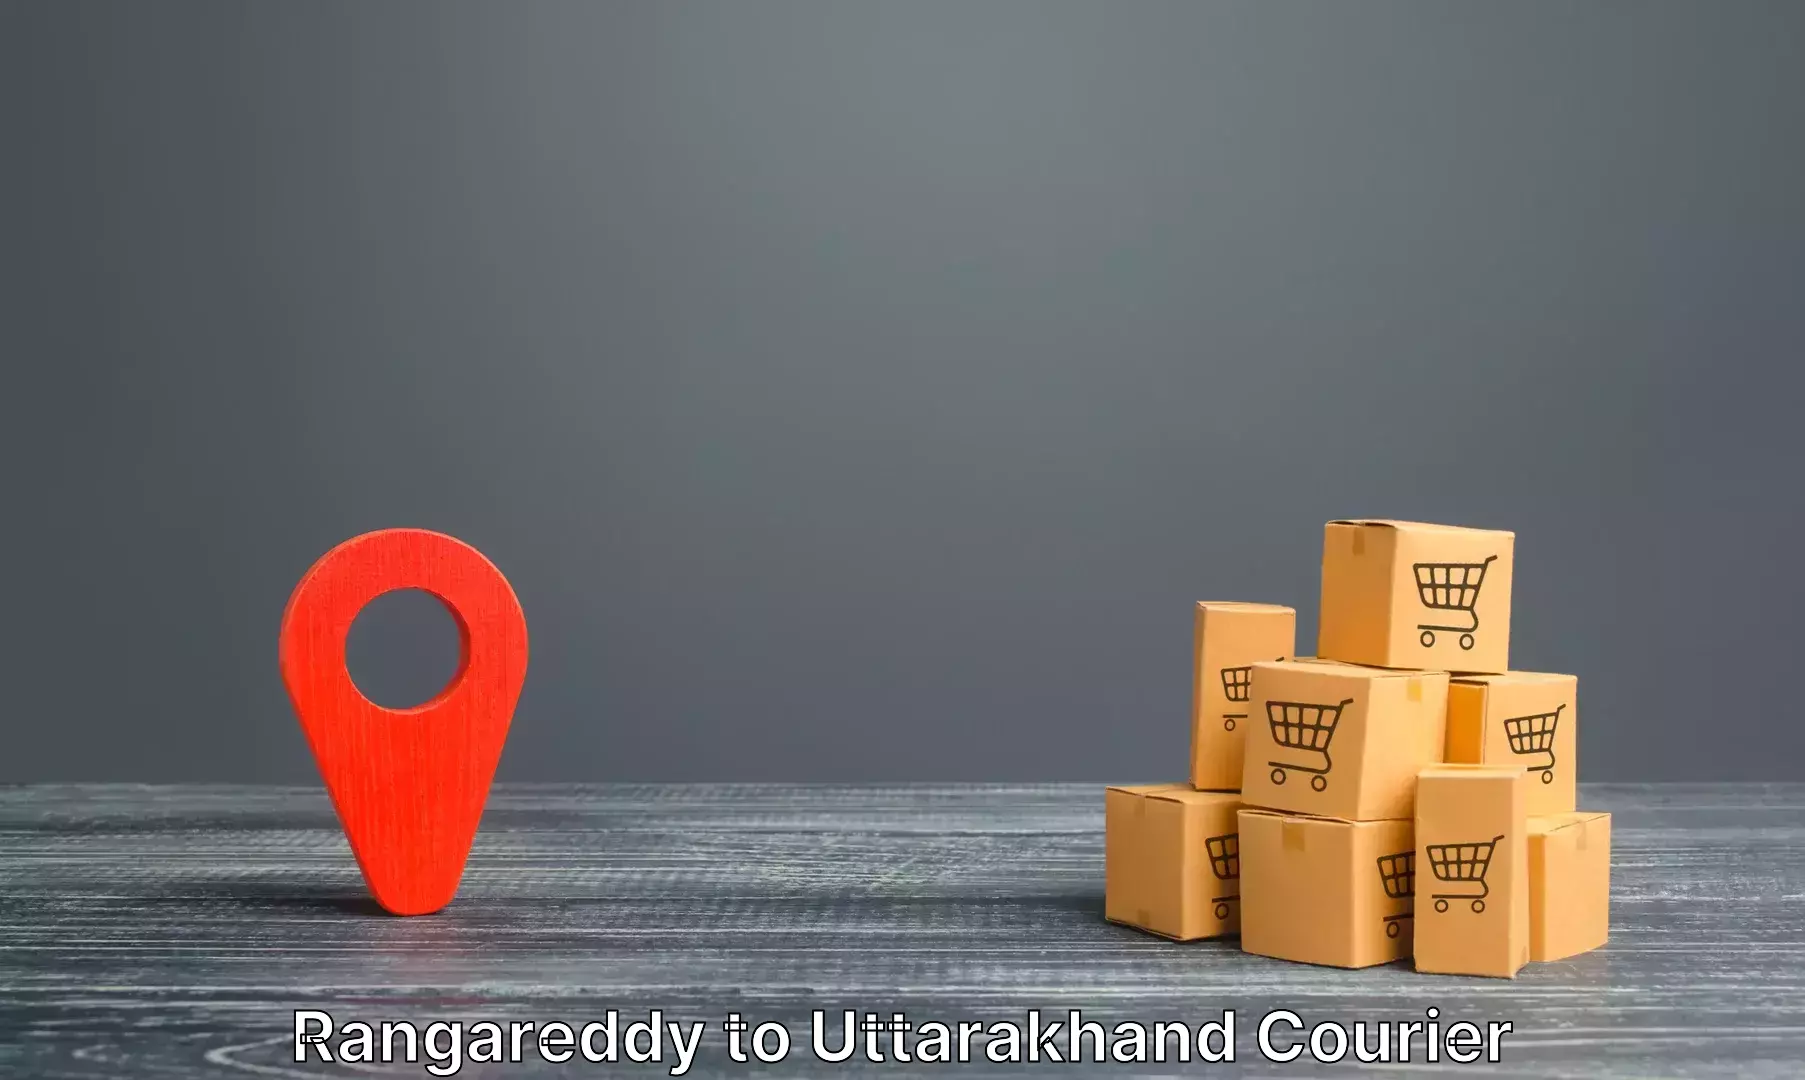 Luggage delivery providers Rangareddy to Rudrapur